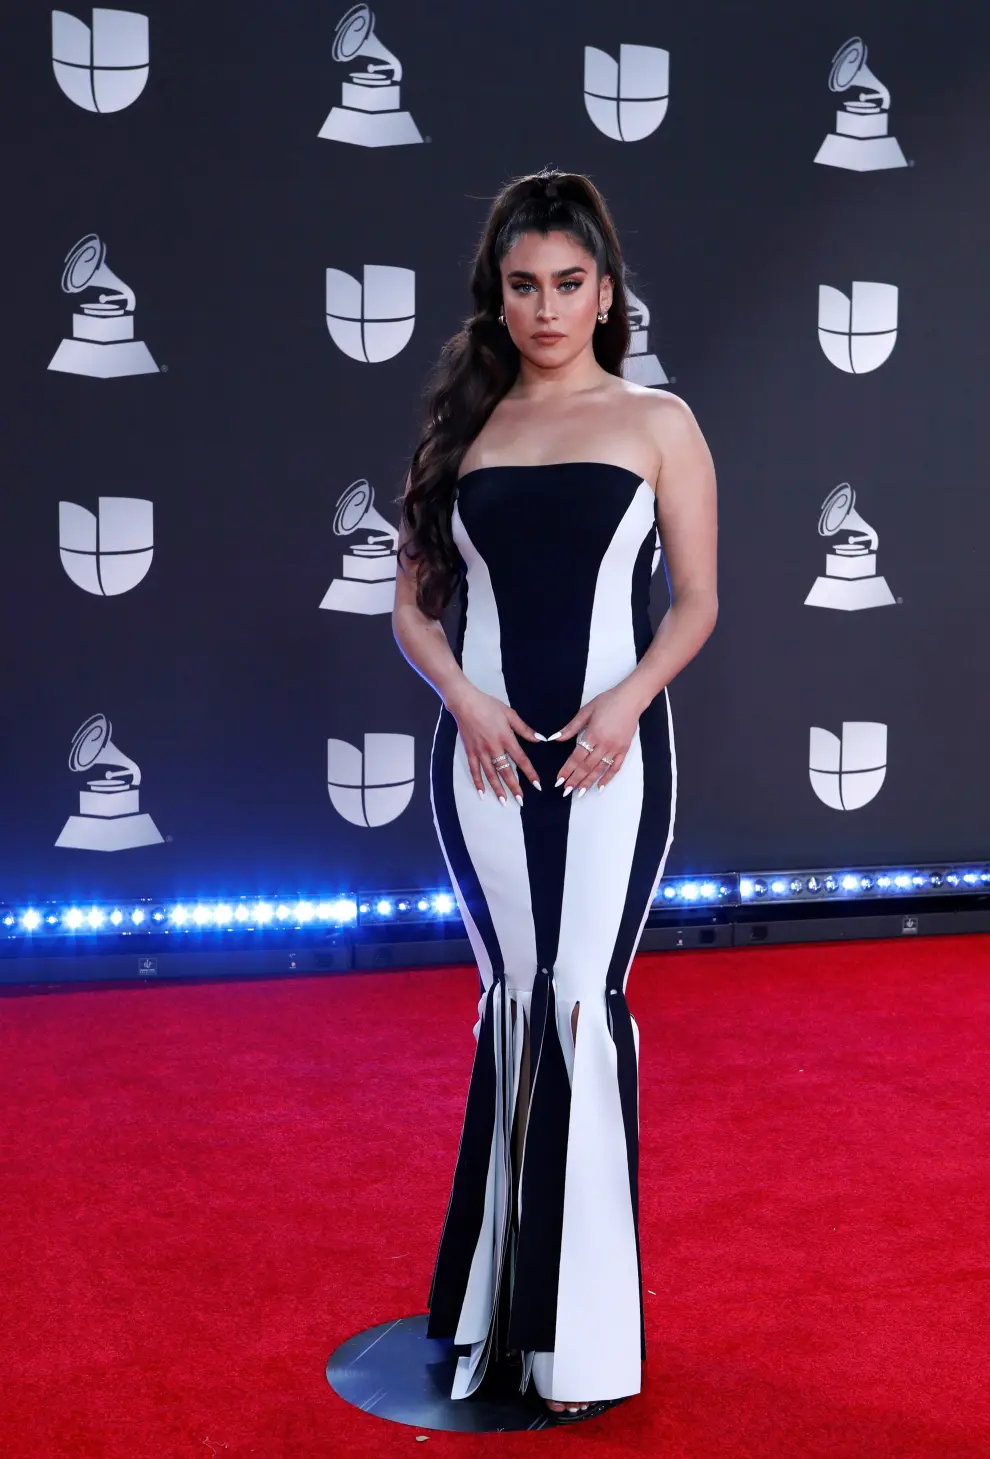 Las Vegas (United States), 14/11/2019.- Bambi Multinota arrives for the 20th annual Latin Grammy Awards ceremony at the MGM Grand Garden Arena in Las Vegas, Nevada, USA, 14 November 2019. The Latin Grammys recognize artistic and/or technical achievement, not sales figures or chart positions, and the winners are determined by the votes of their peers - the qualified voting members of the Latin Recording Academy. (Estados Unidos) EFE/EPA/NINA PROMMER Arrivals - 20th Latin Grammy Awards